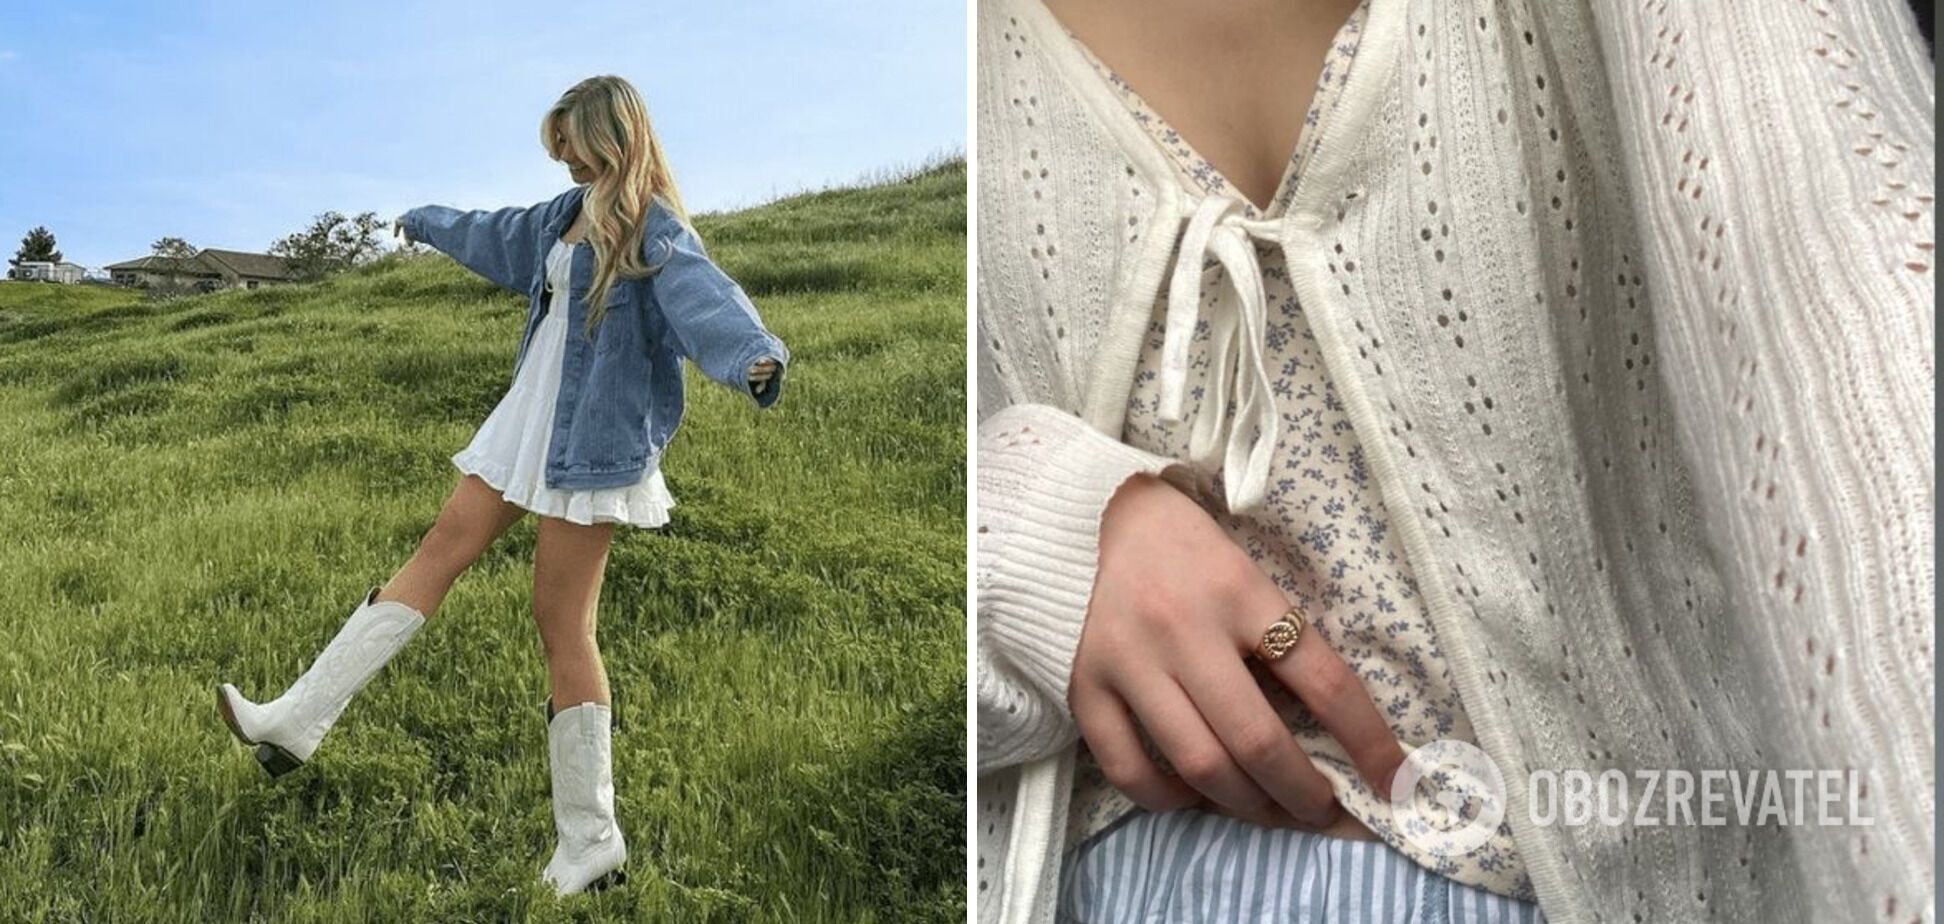 11 anti-fashion trends according to TikTok and how to replace them